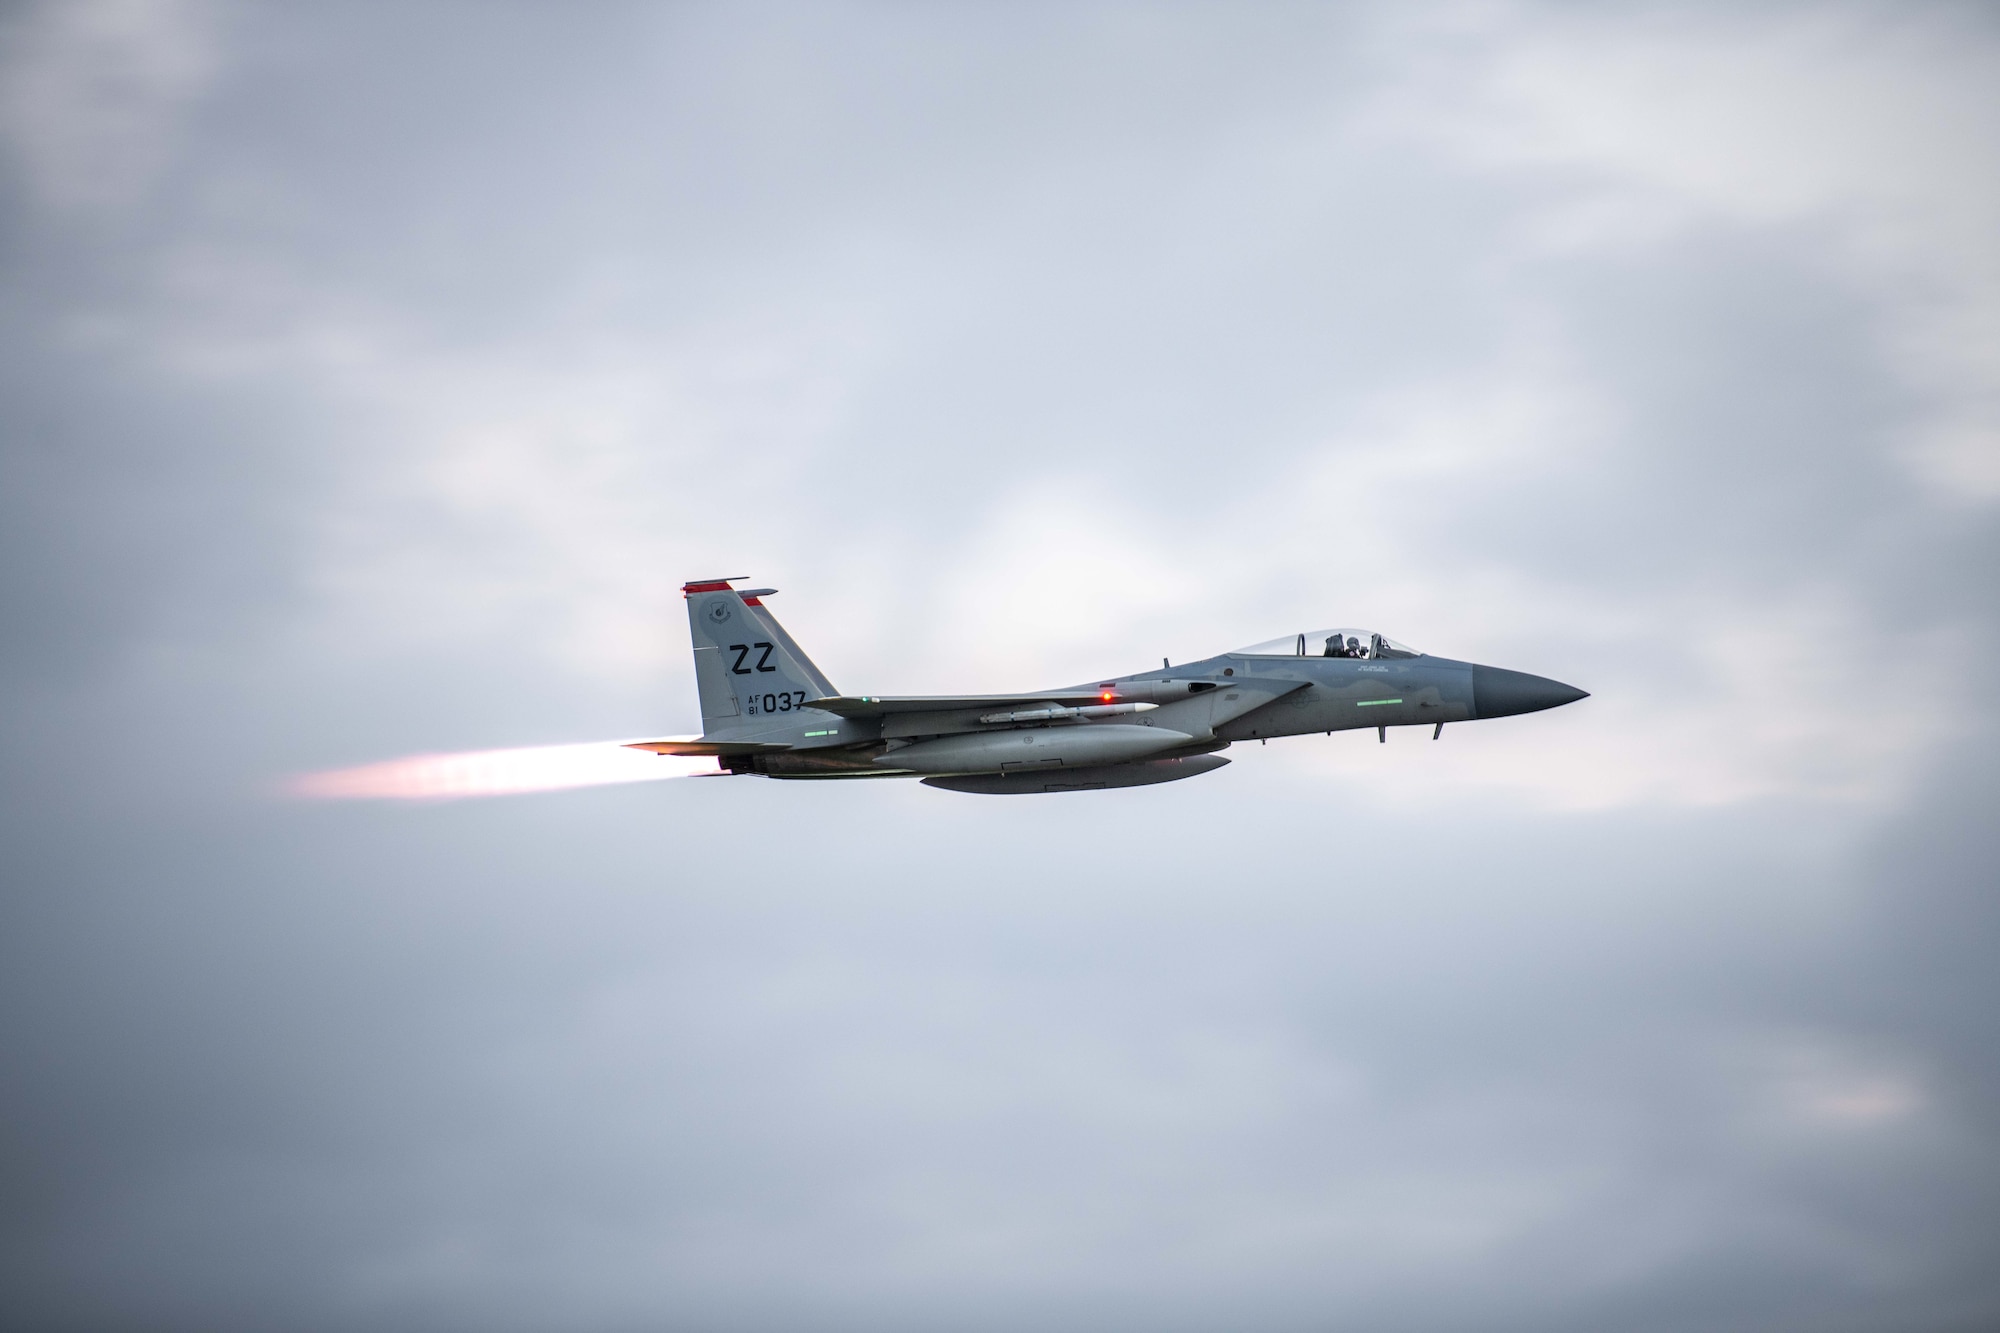 An F-15C Eagle assigned to the 67th Fighter Squadron takes off for Red Flag-Alaska at Kadena Air Base, Japan, April 15, 2022. Red Flag-Alaska is a Pacific Air Forces-directed field training exercise focused on improving the combat readiness of U.S. and international forces and provides training for units preparing for air and space expeditionary force tasking. (U.S. Air Force photo by Airman 1st Class Sebastian Romawac)